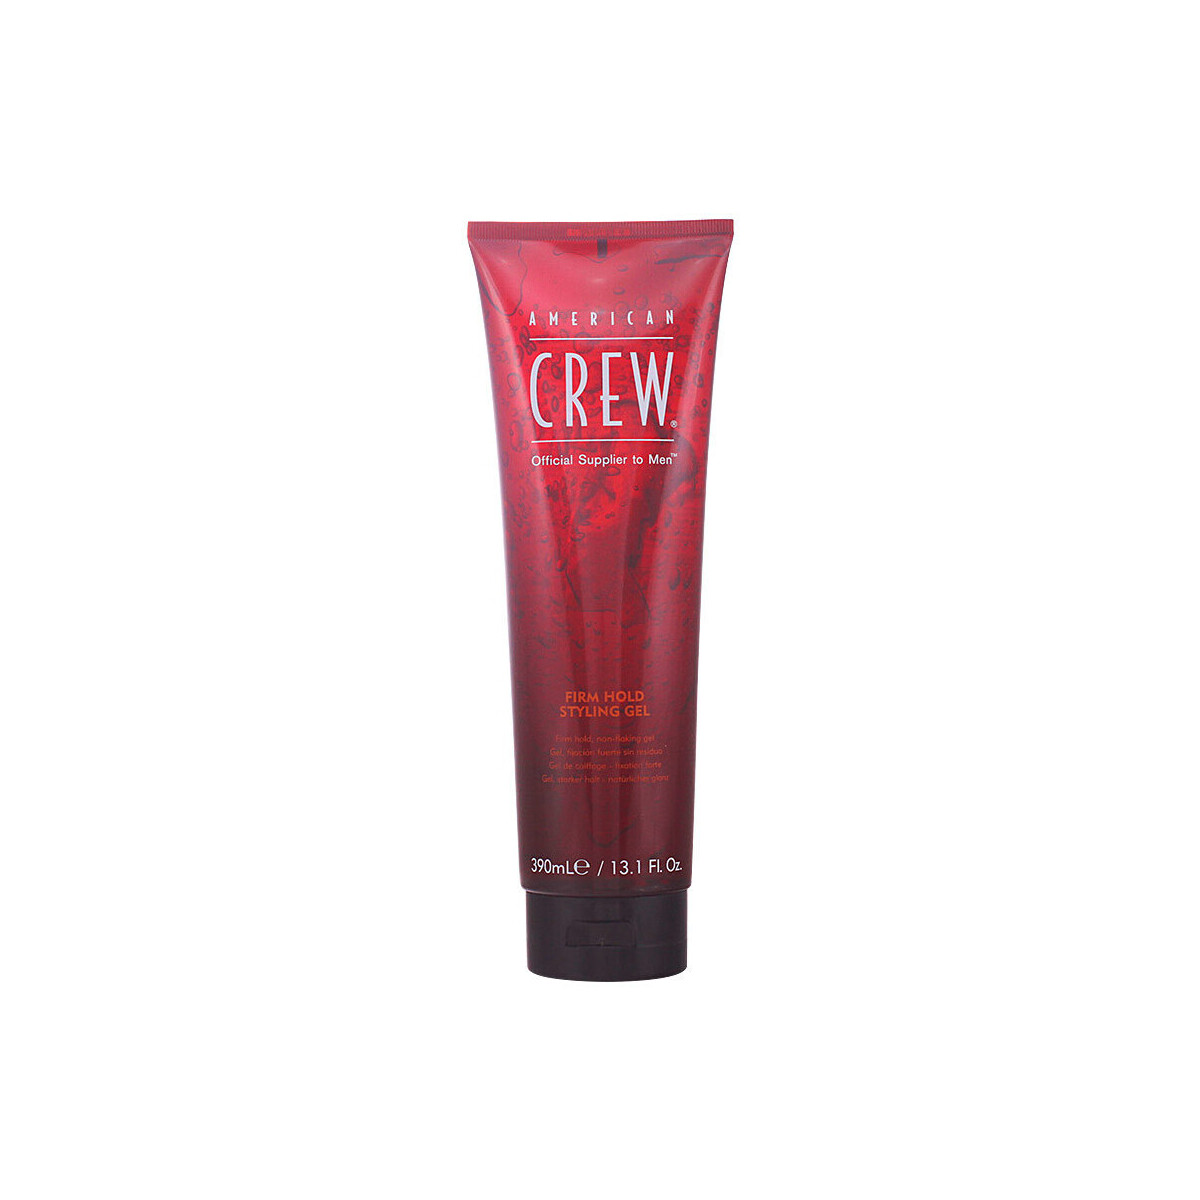 Beauté Homme Coiffants & modelants American Crew Firm Hold Styling Gel 